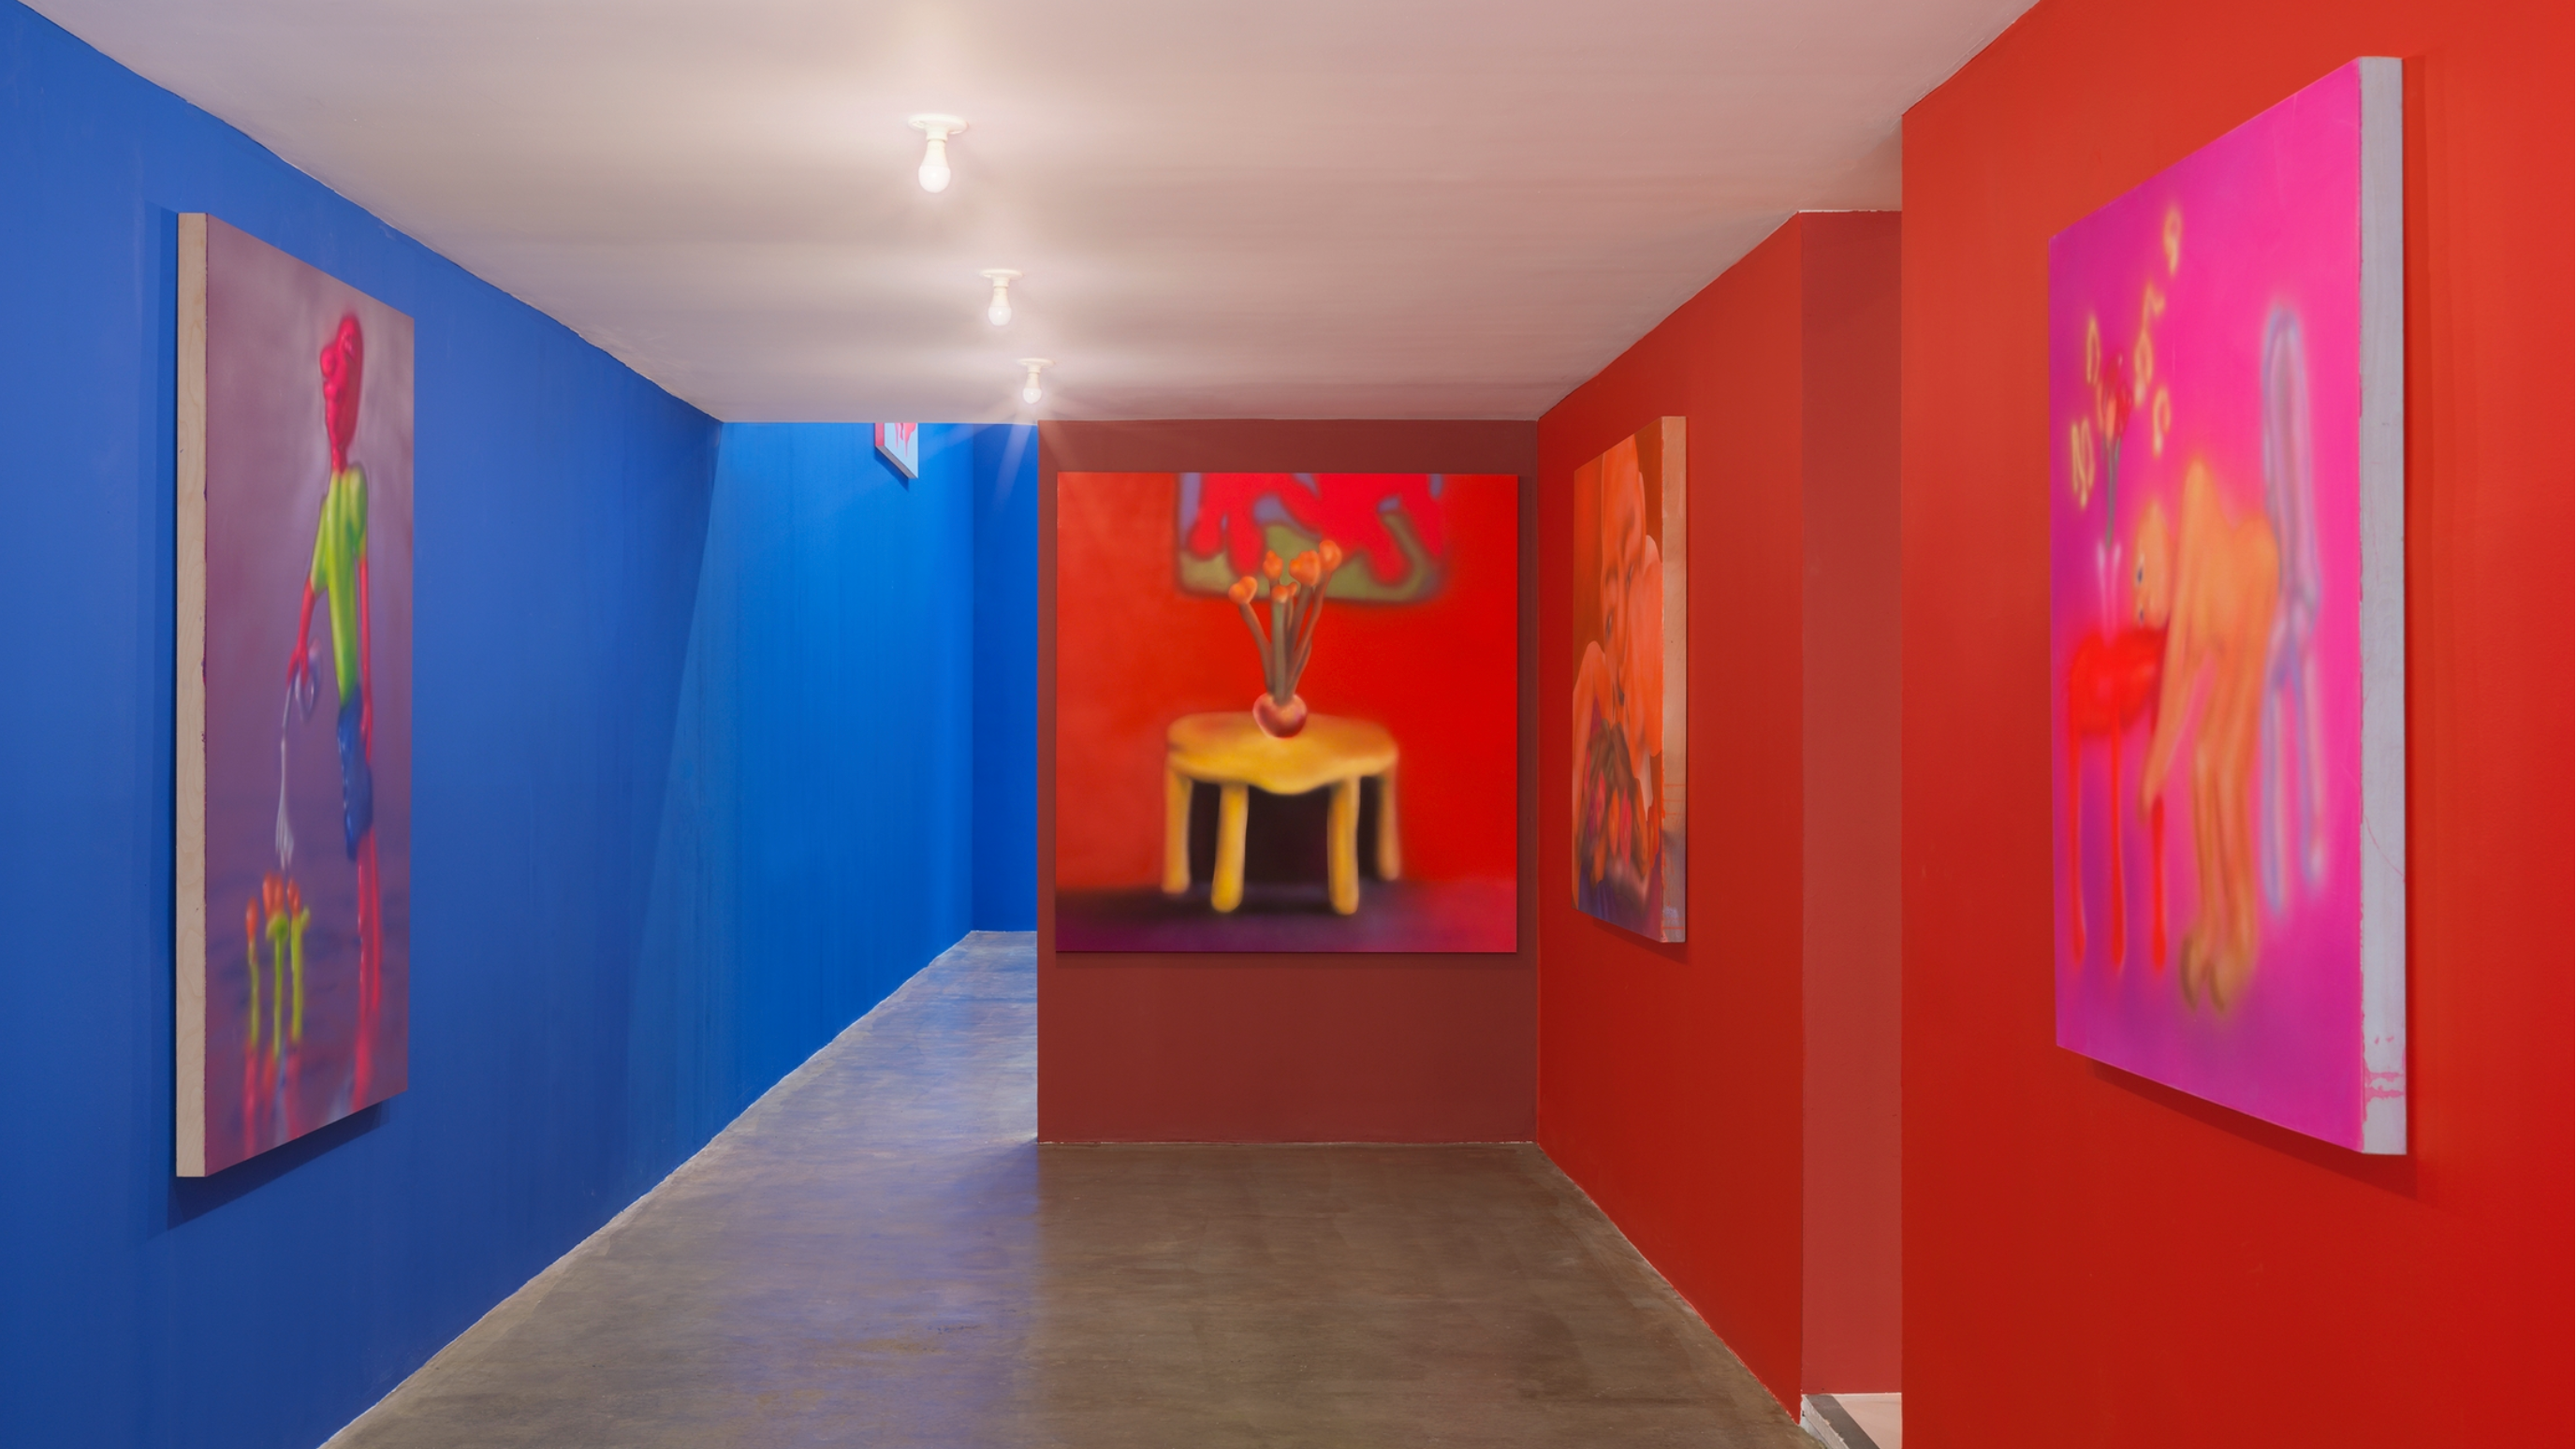 A room of red and blue walls. Four colorful paintings hang on the walls.